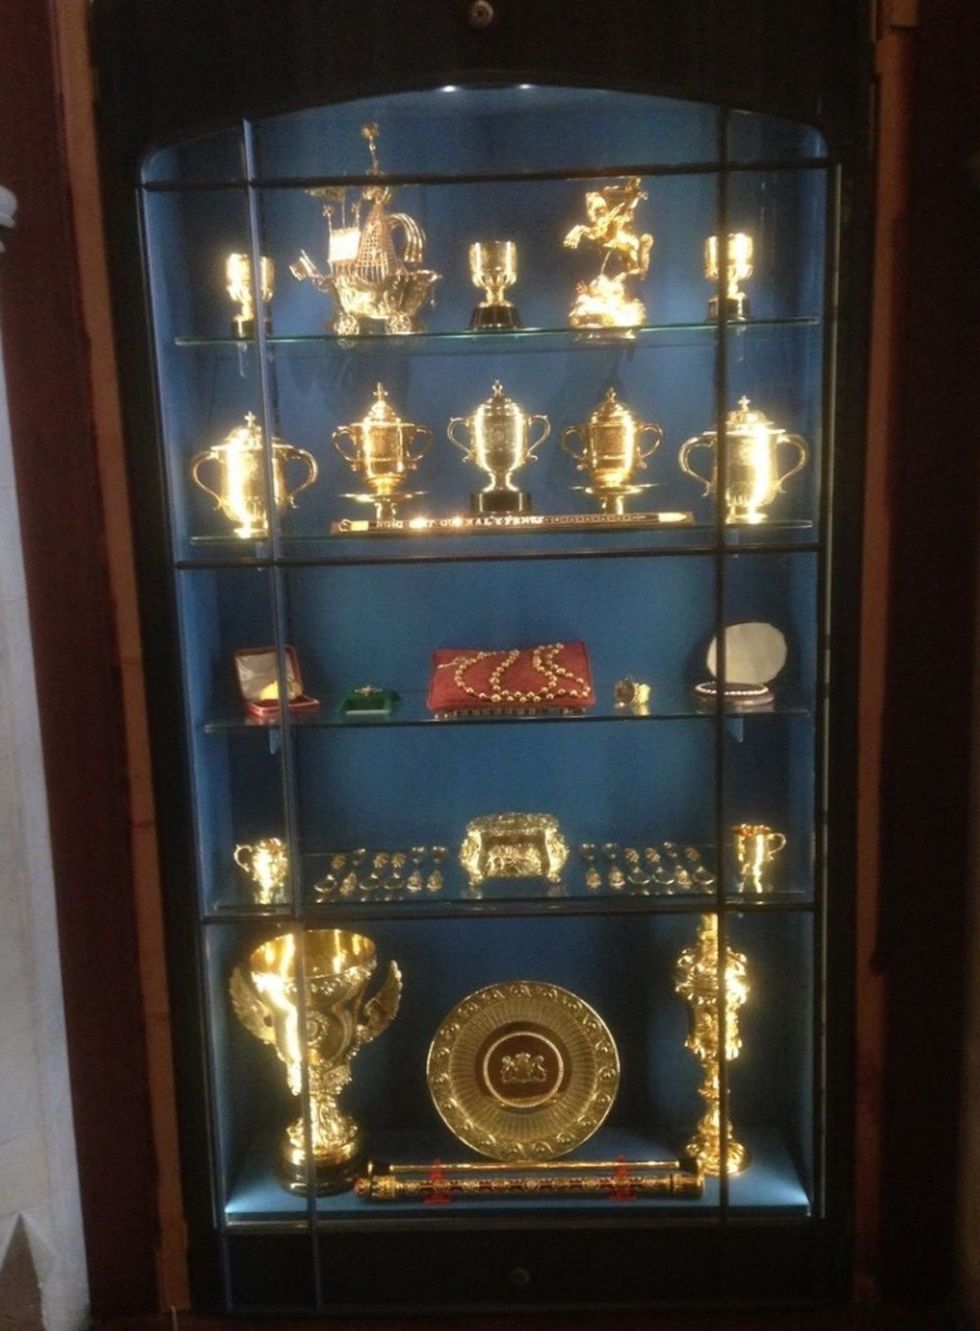 Display cabinet at Arundel Castle in West Sussex from which a set of "irreplaceable" gold rosary beads carried by Mary Queen of Scots to her execution in 1587 were taken, along with other historic treasures worth more than 1 million.